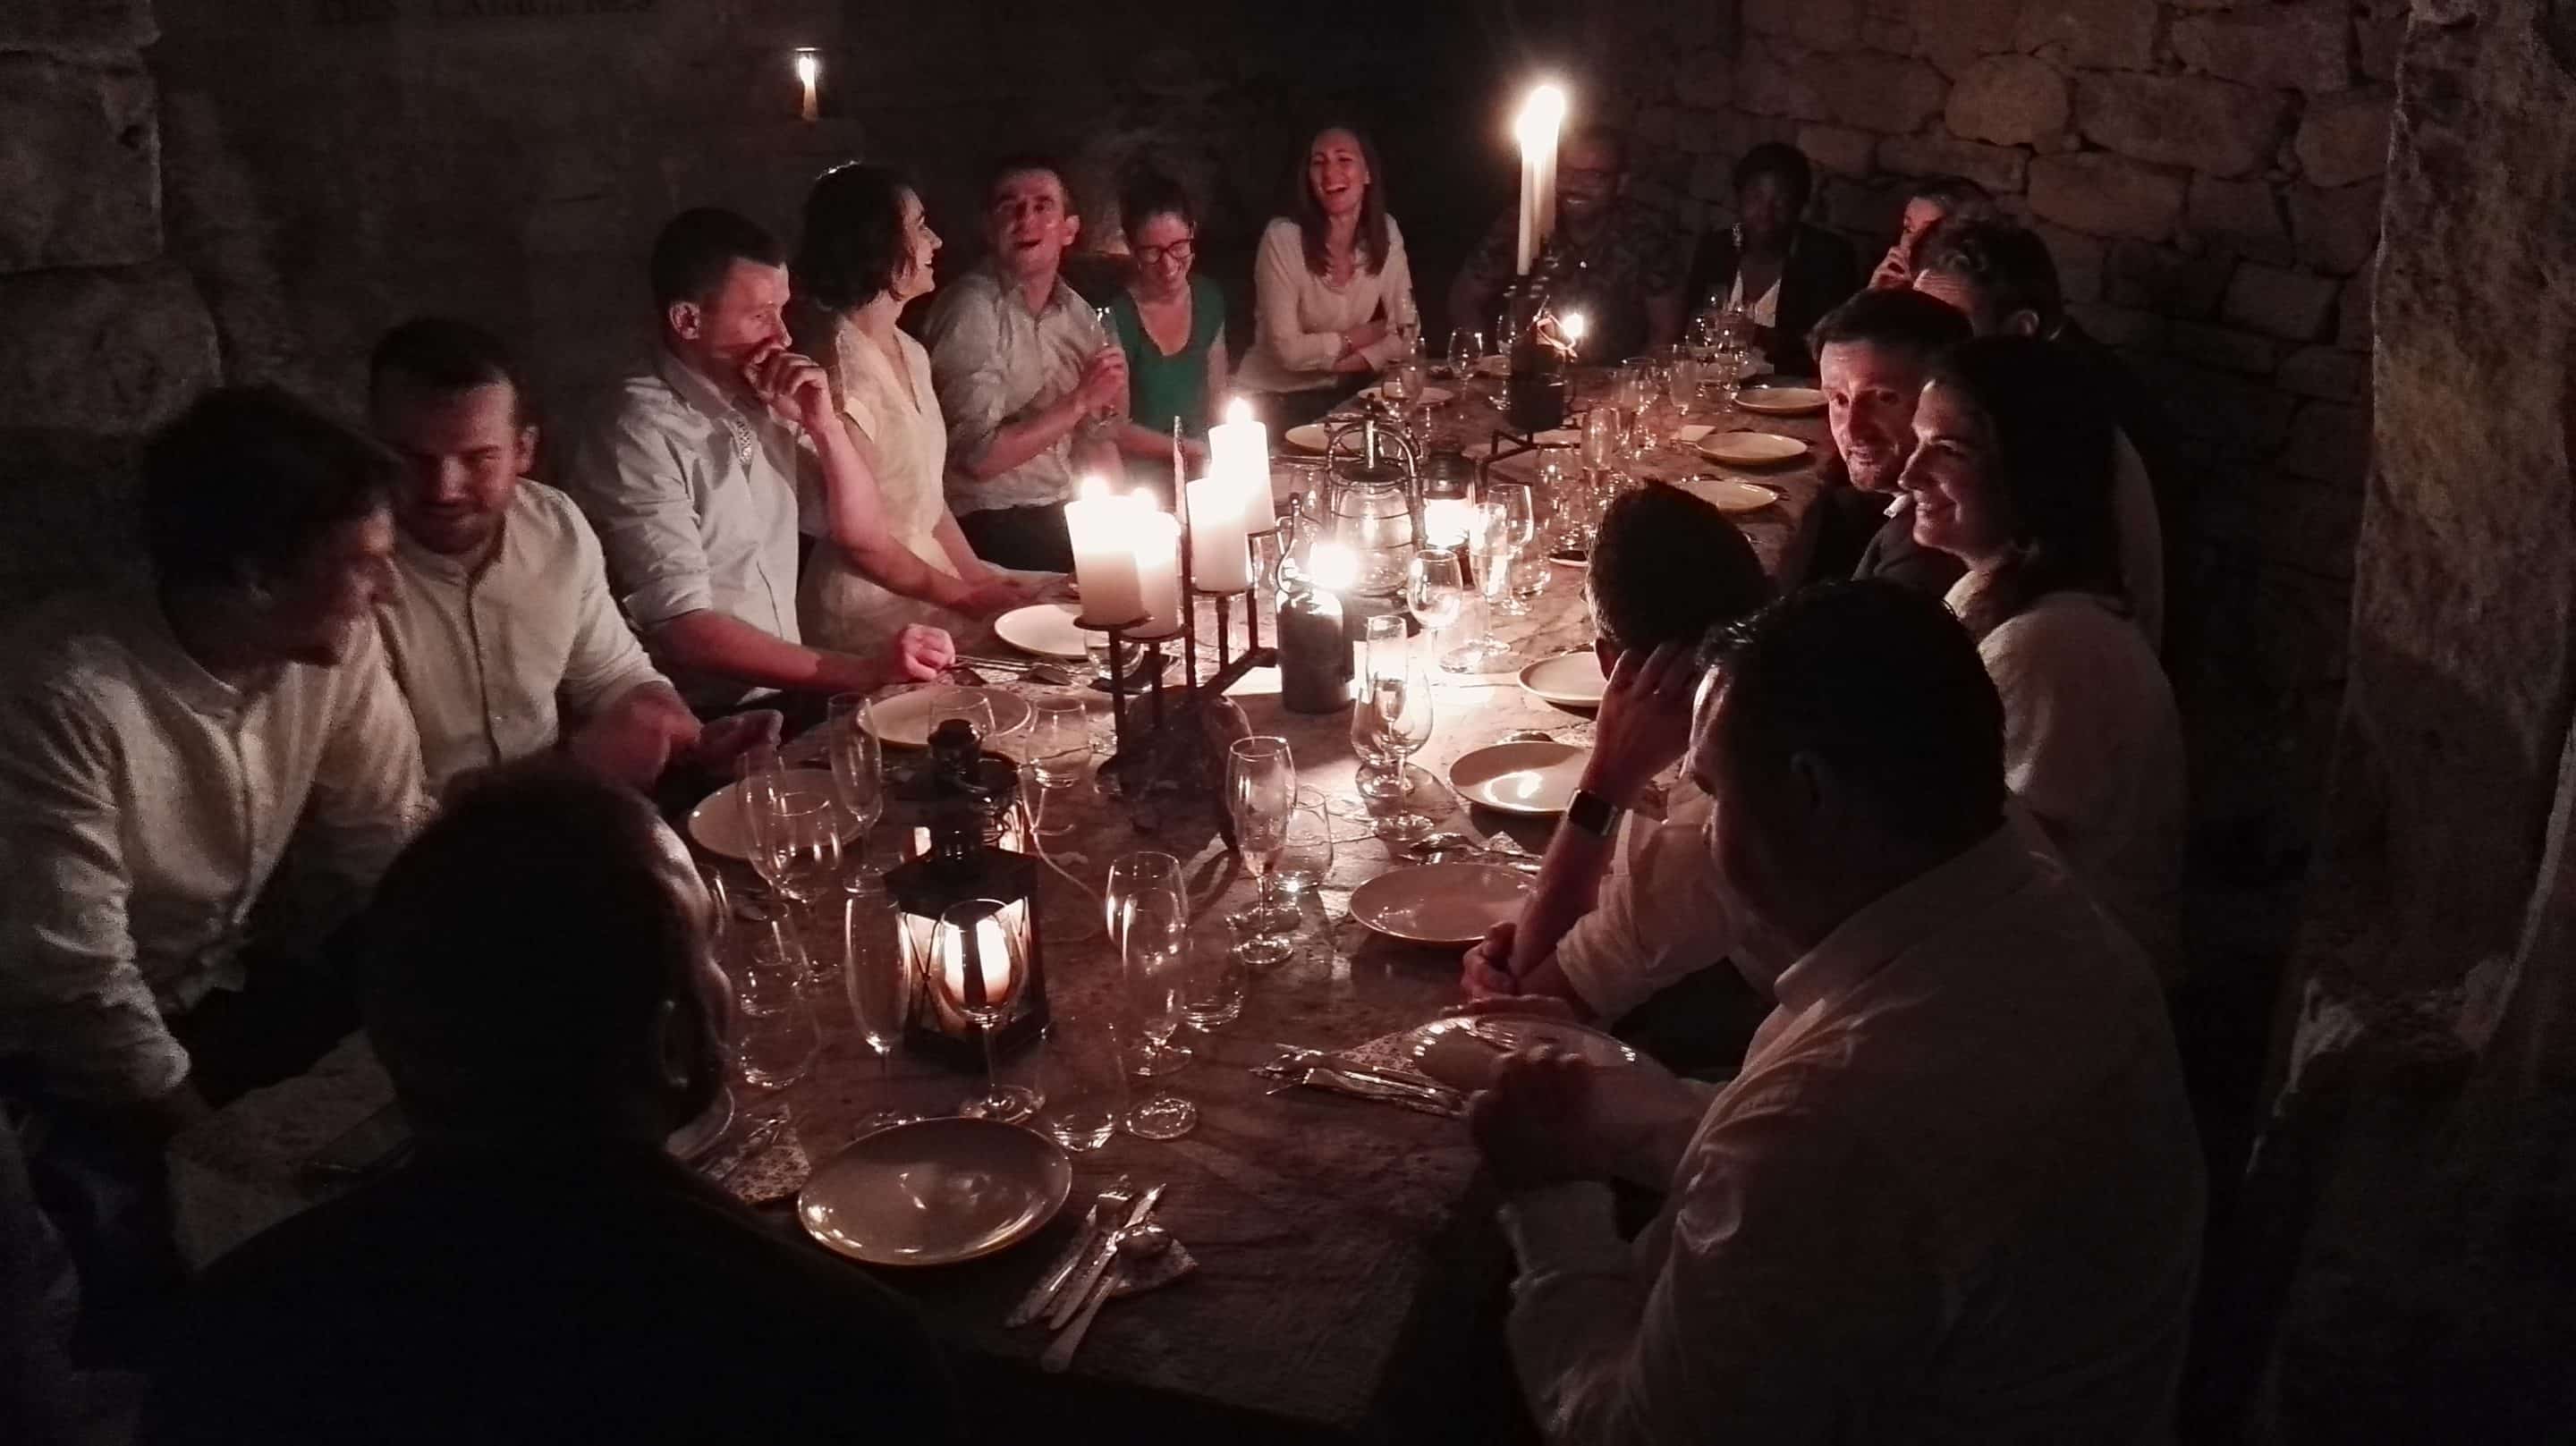 leboncoin : Dinner in the Catacombs